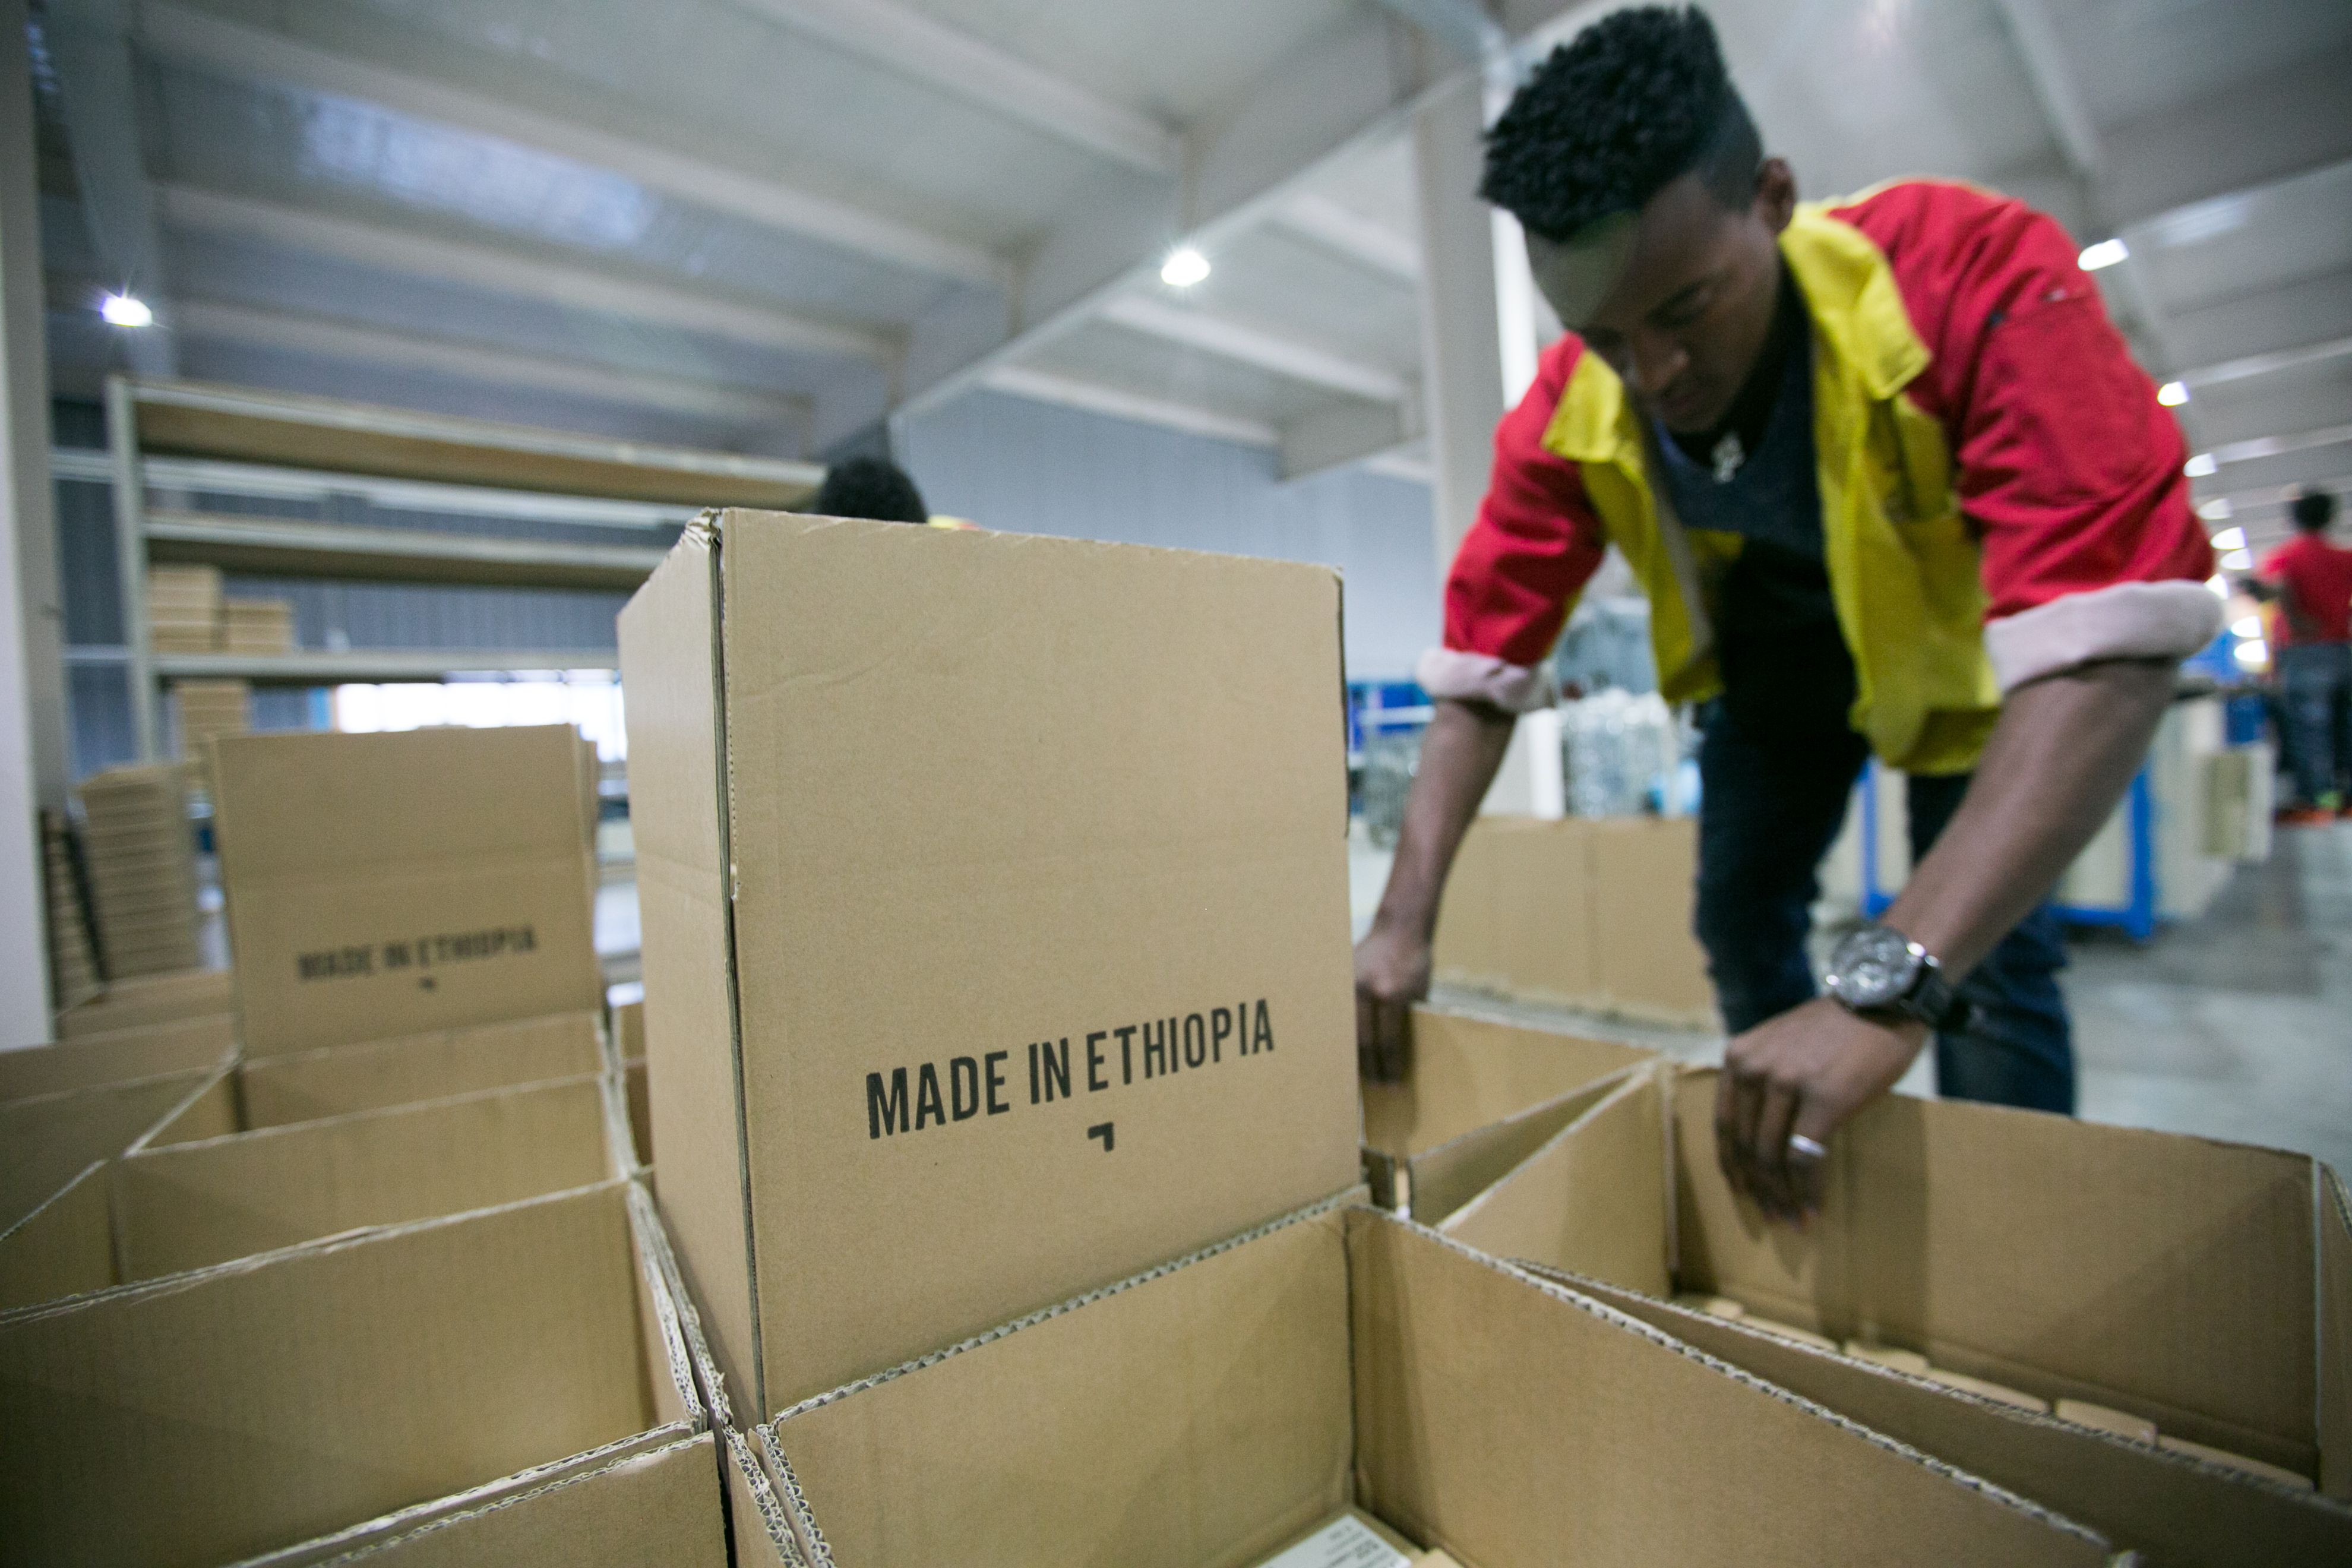 An Ethiopian worker fills boxes with shoes from the Huajian assembly line. Many of the shoes manufactured here are sold in the United States. Image by Noah Fowler. Ethiopia, 2017.